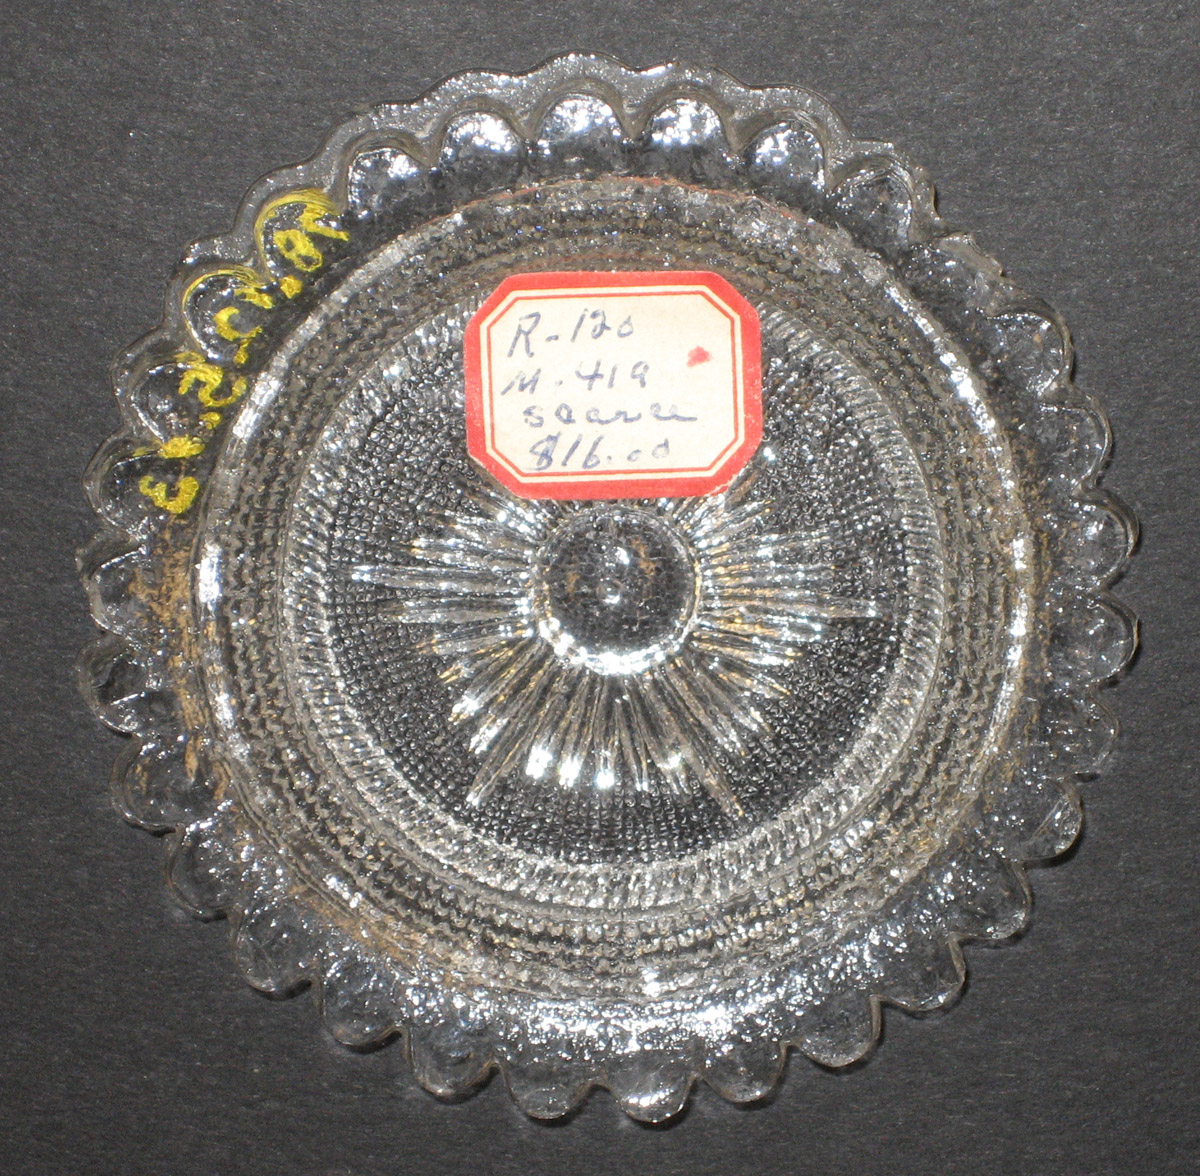 1978.0125.013 Glass cup plate